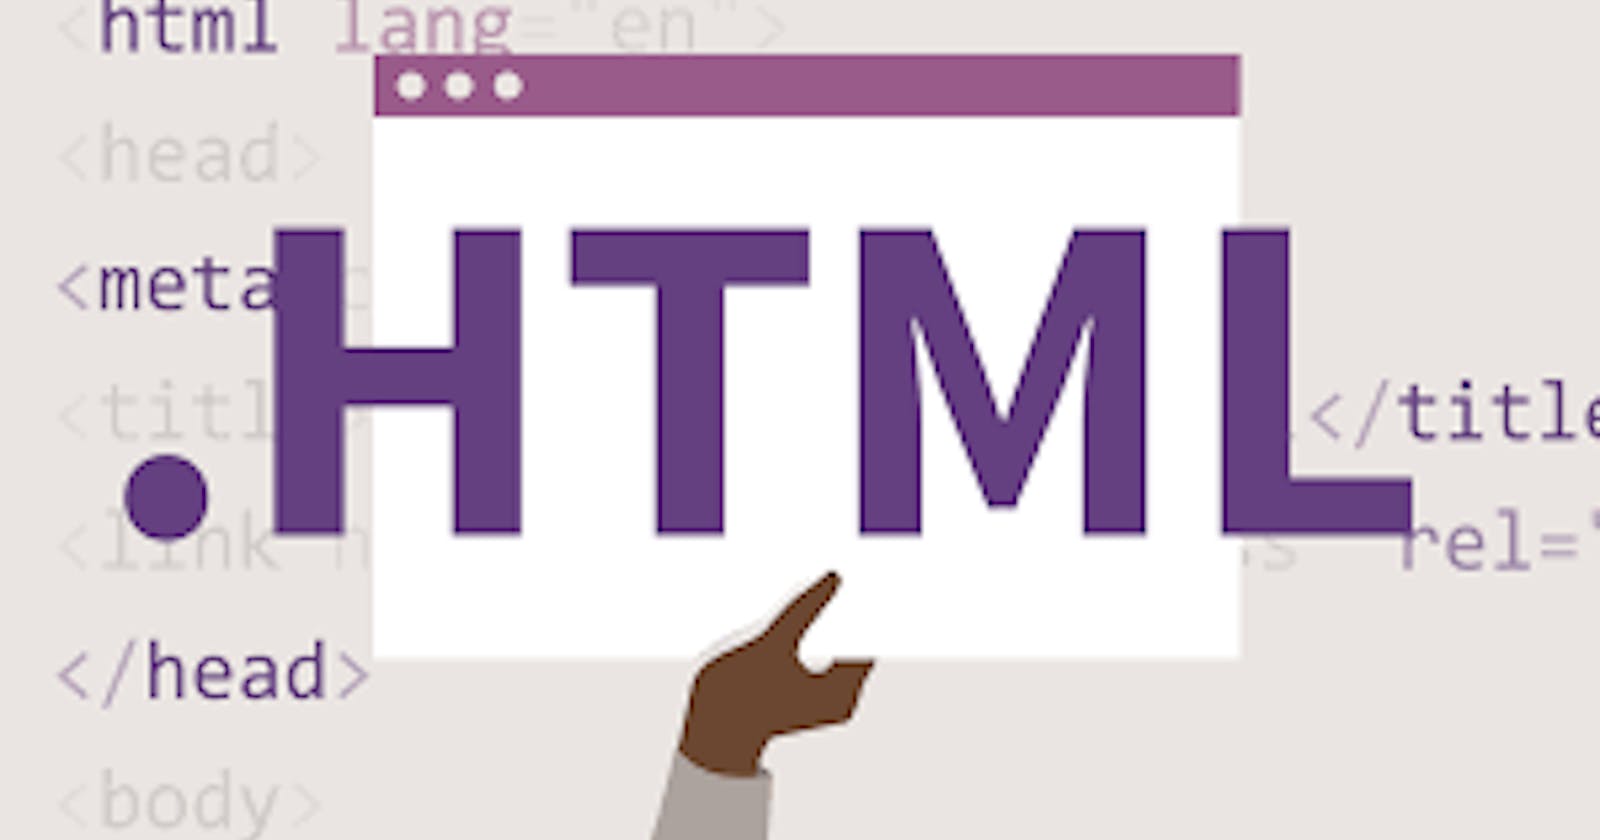 HTML5 Tags at a glance